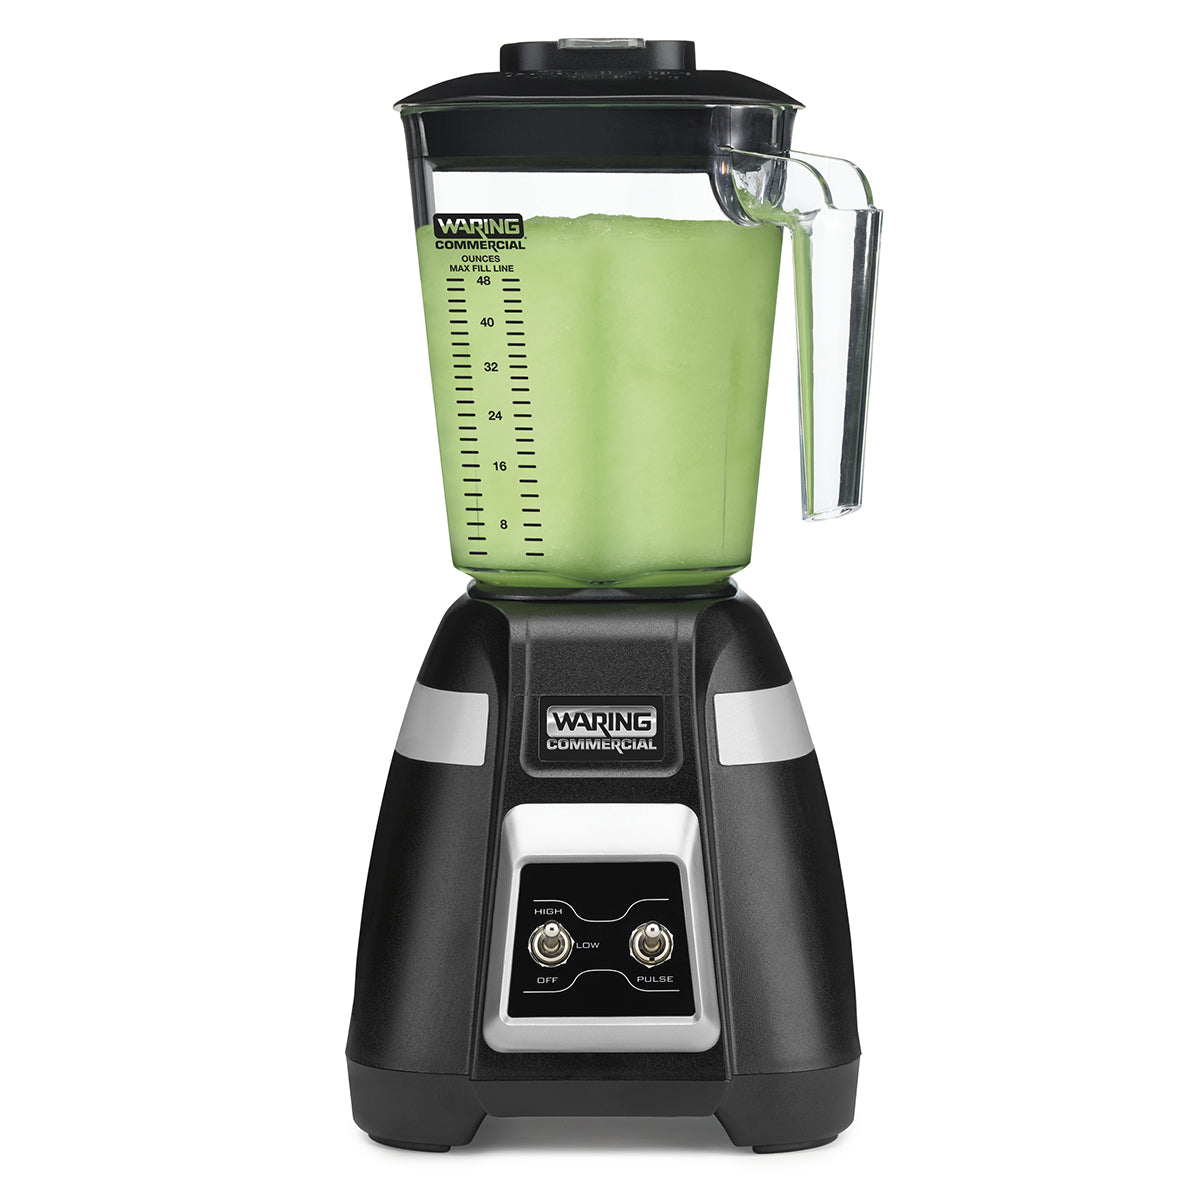 Waring BB300 1HP Bar Blender 2-Speed/PULSE w/ Toggle Switch Controls and 48 oz. Container